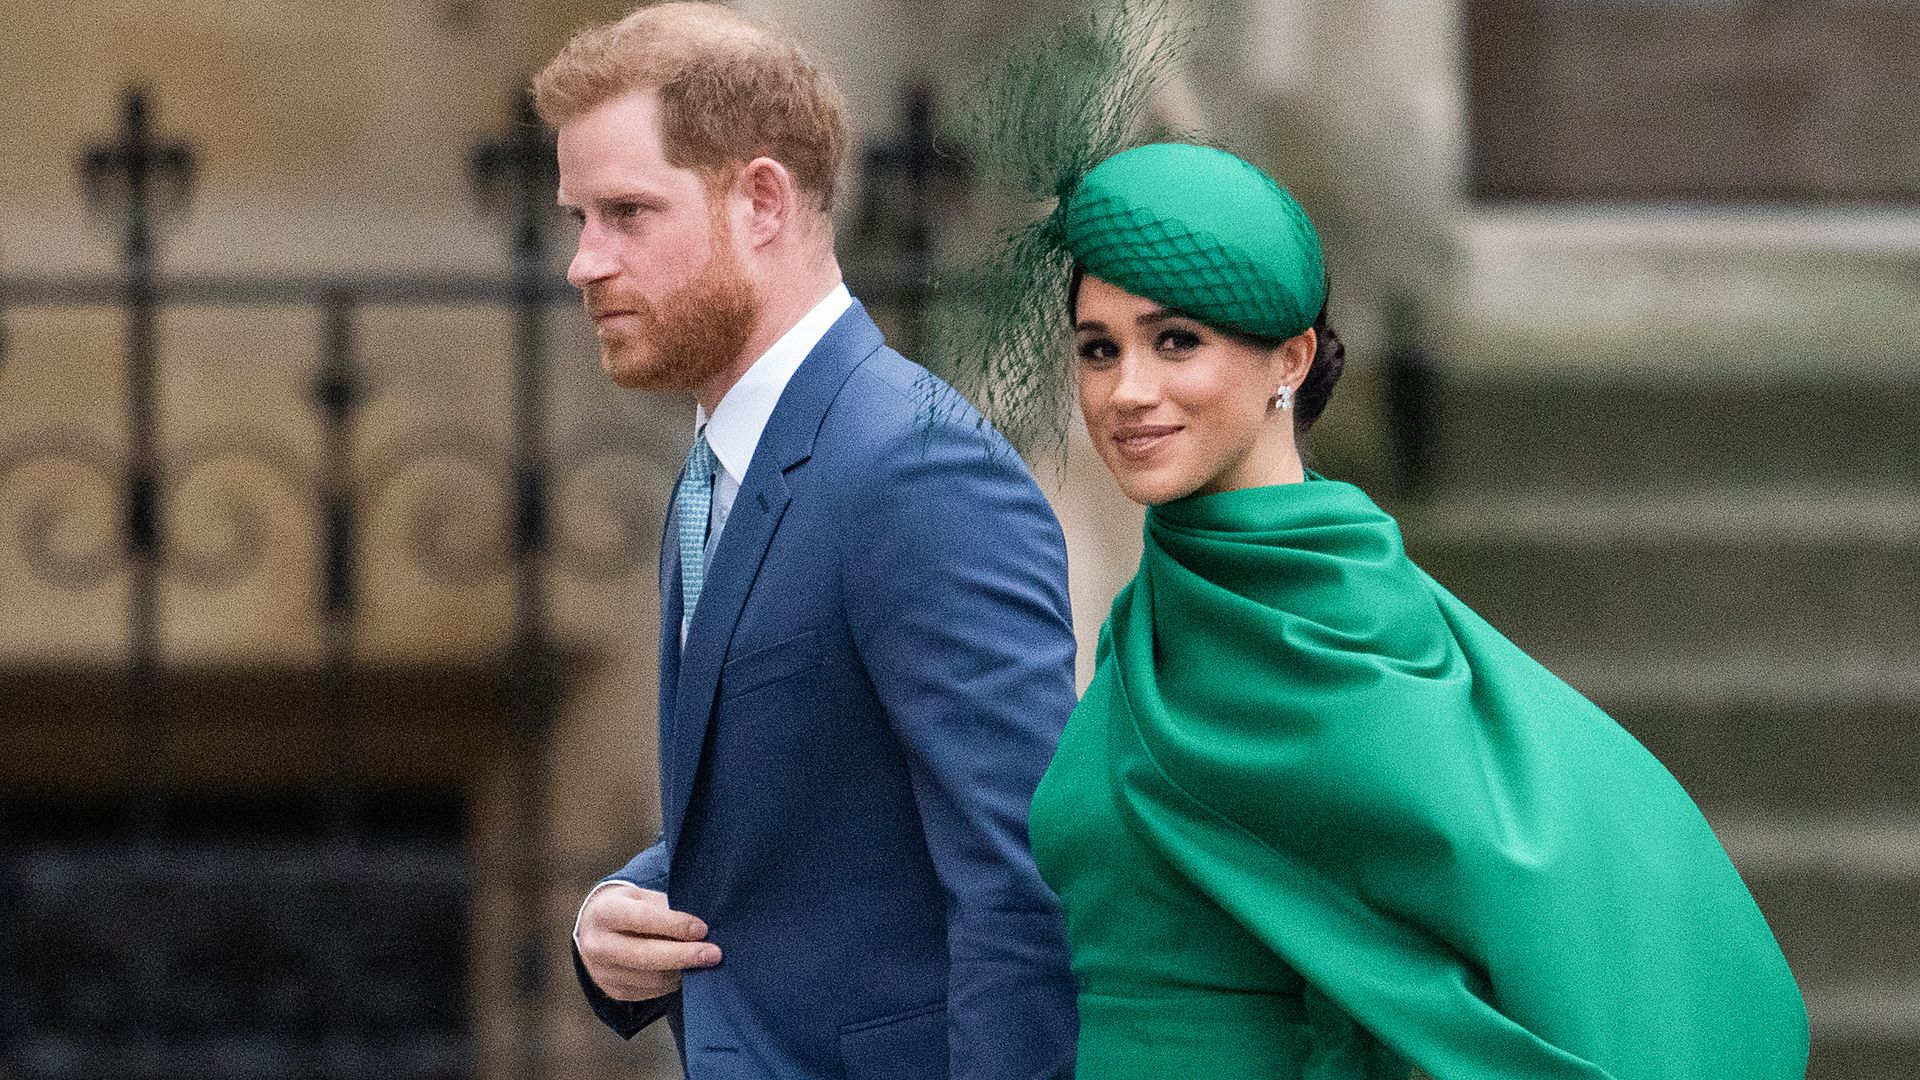 LONDON, ENGLAND - MARCH 09: Prince Harry, Duke of Sussex and Meghan, Duchess of Sussex attend the Commonwealth Day Service 2020 on March 09, 2020 in London, England. (Photo by Gareth Cattermole/Getty Images)